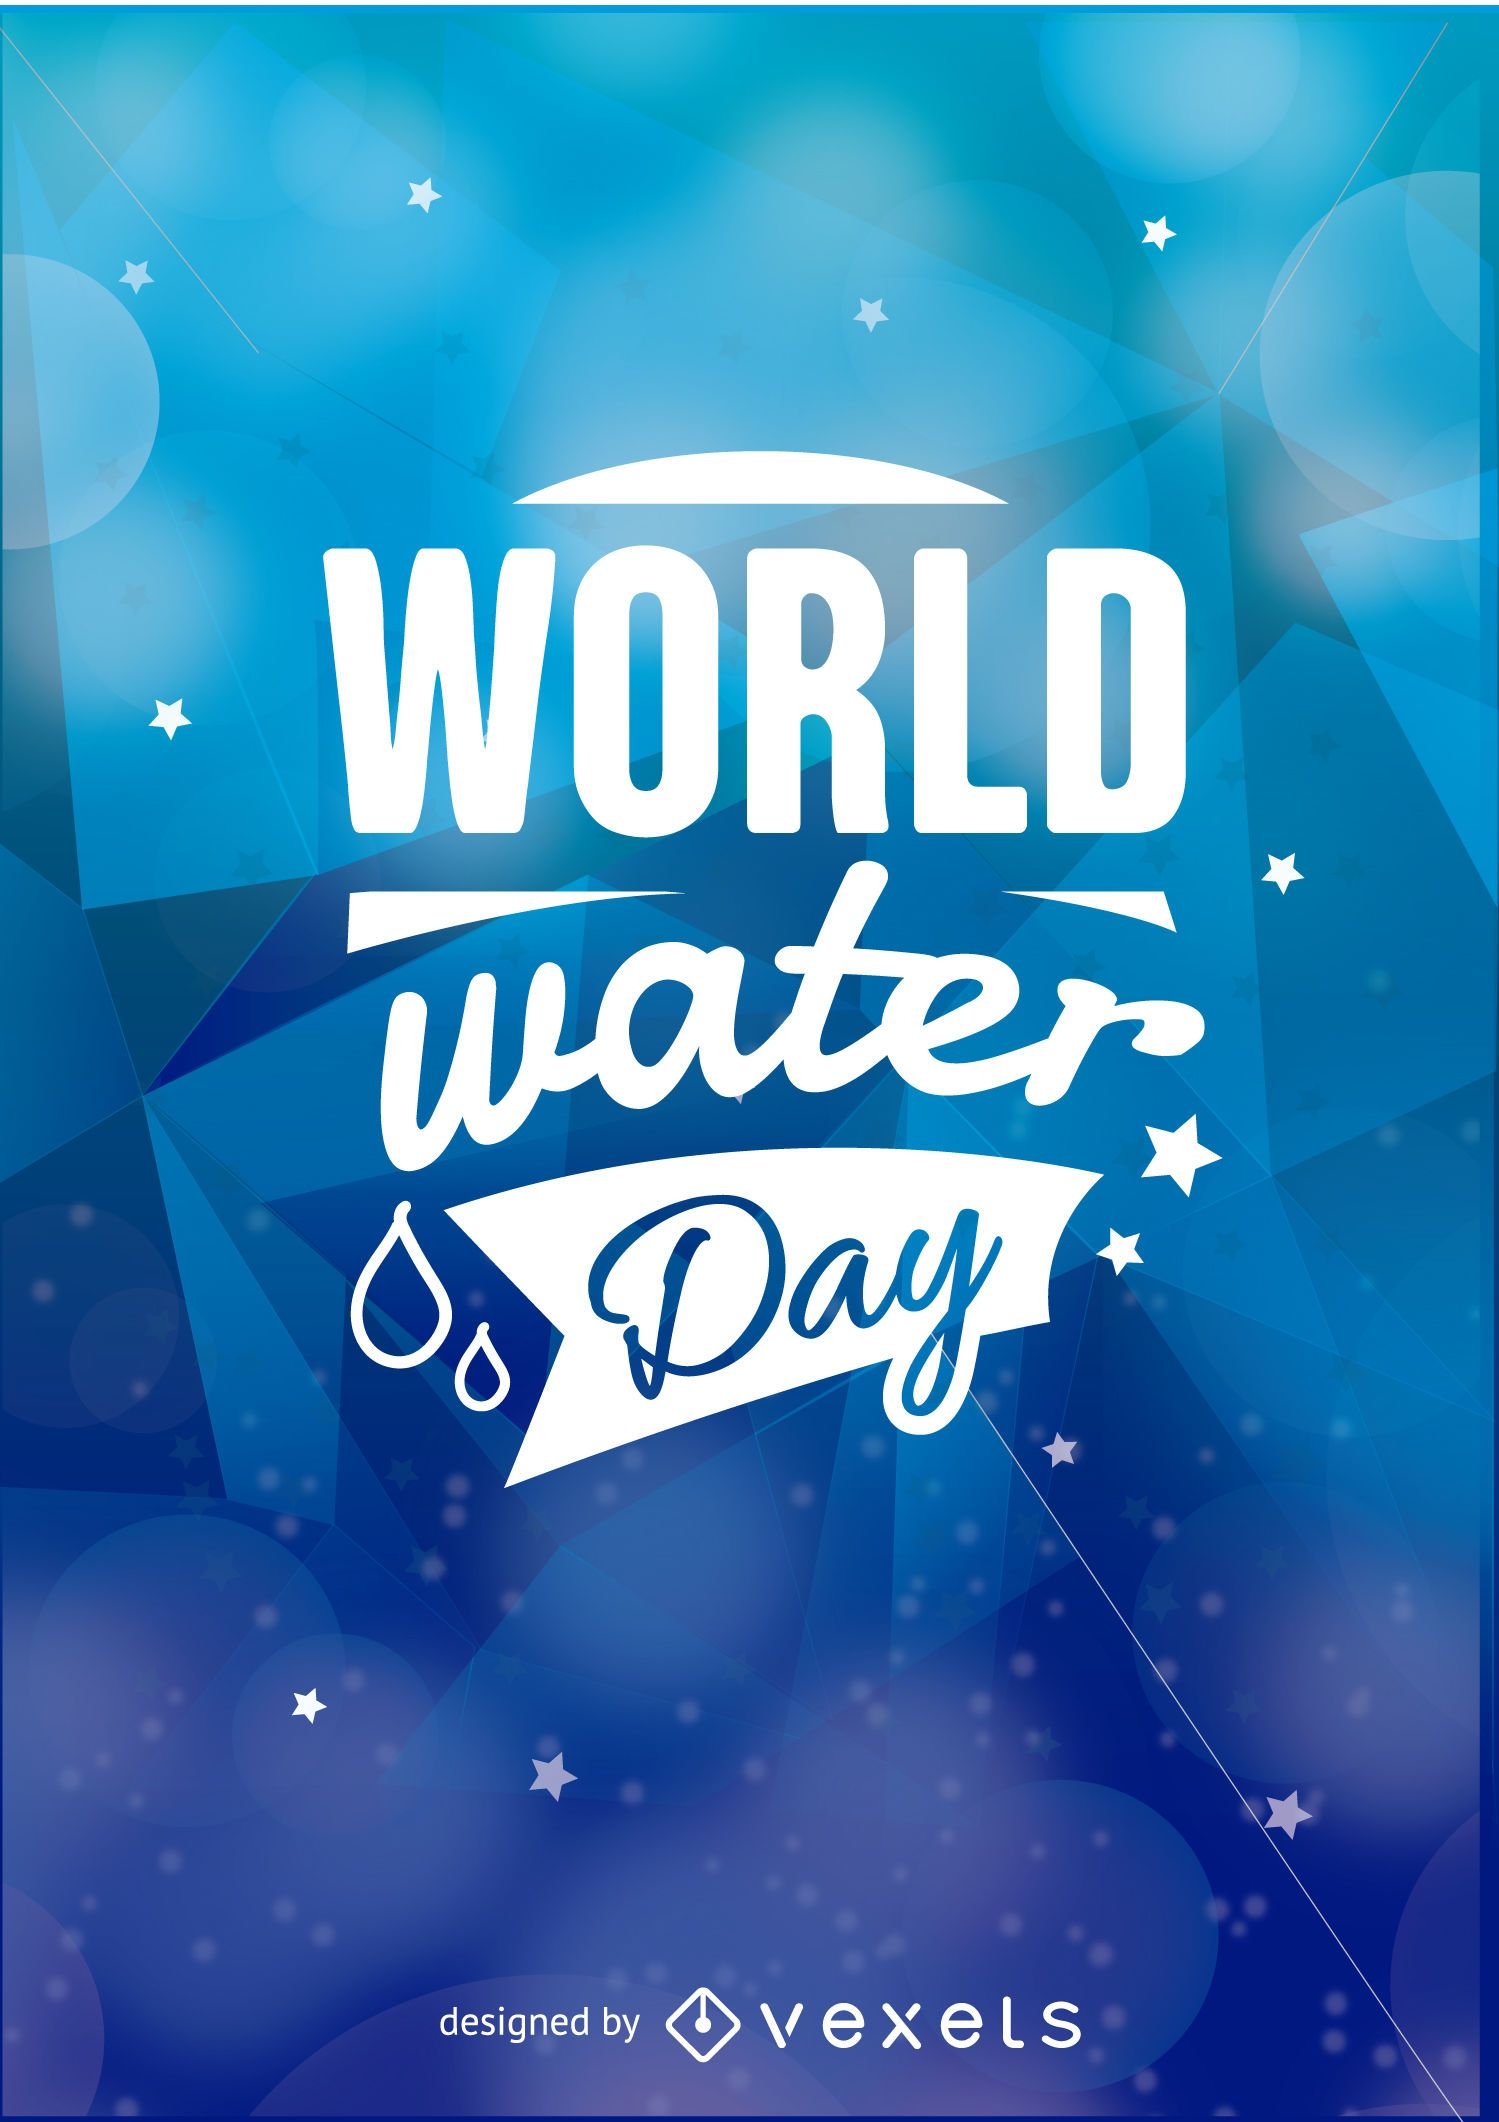 World Water Day emblem over a blue background